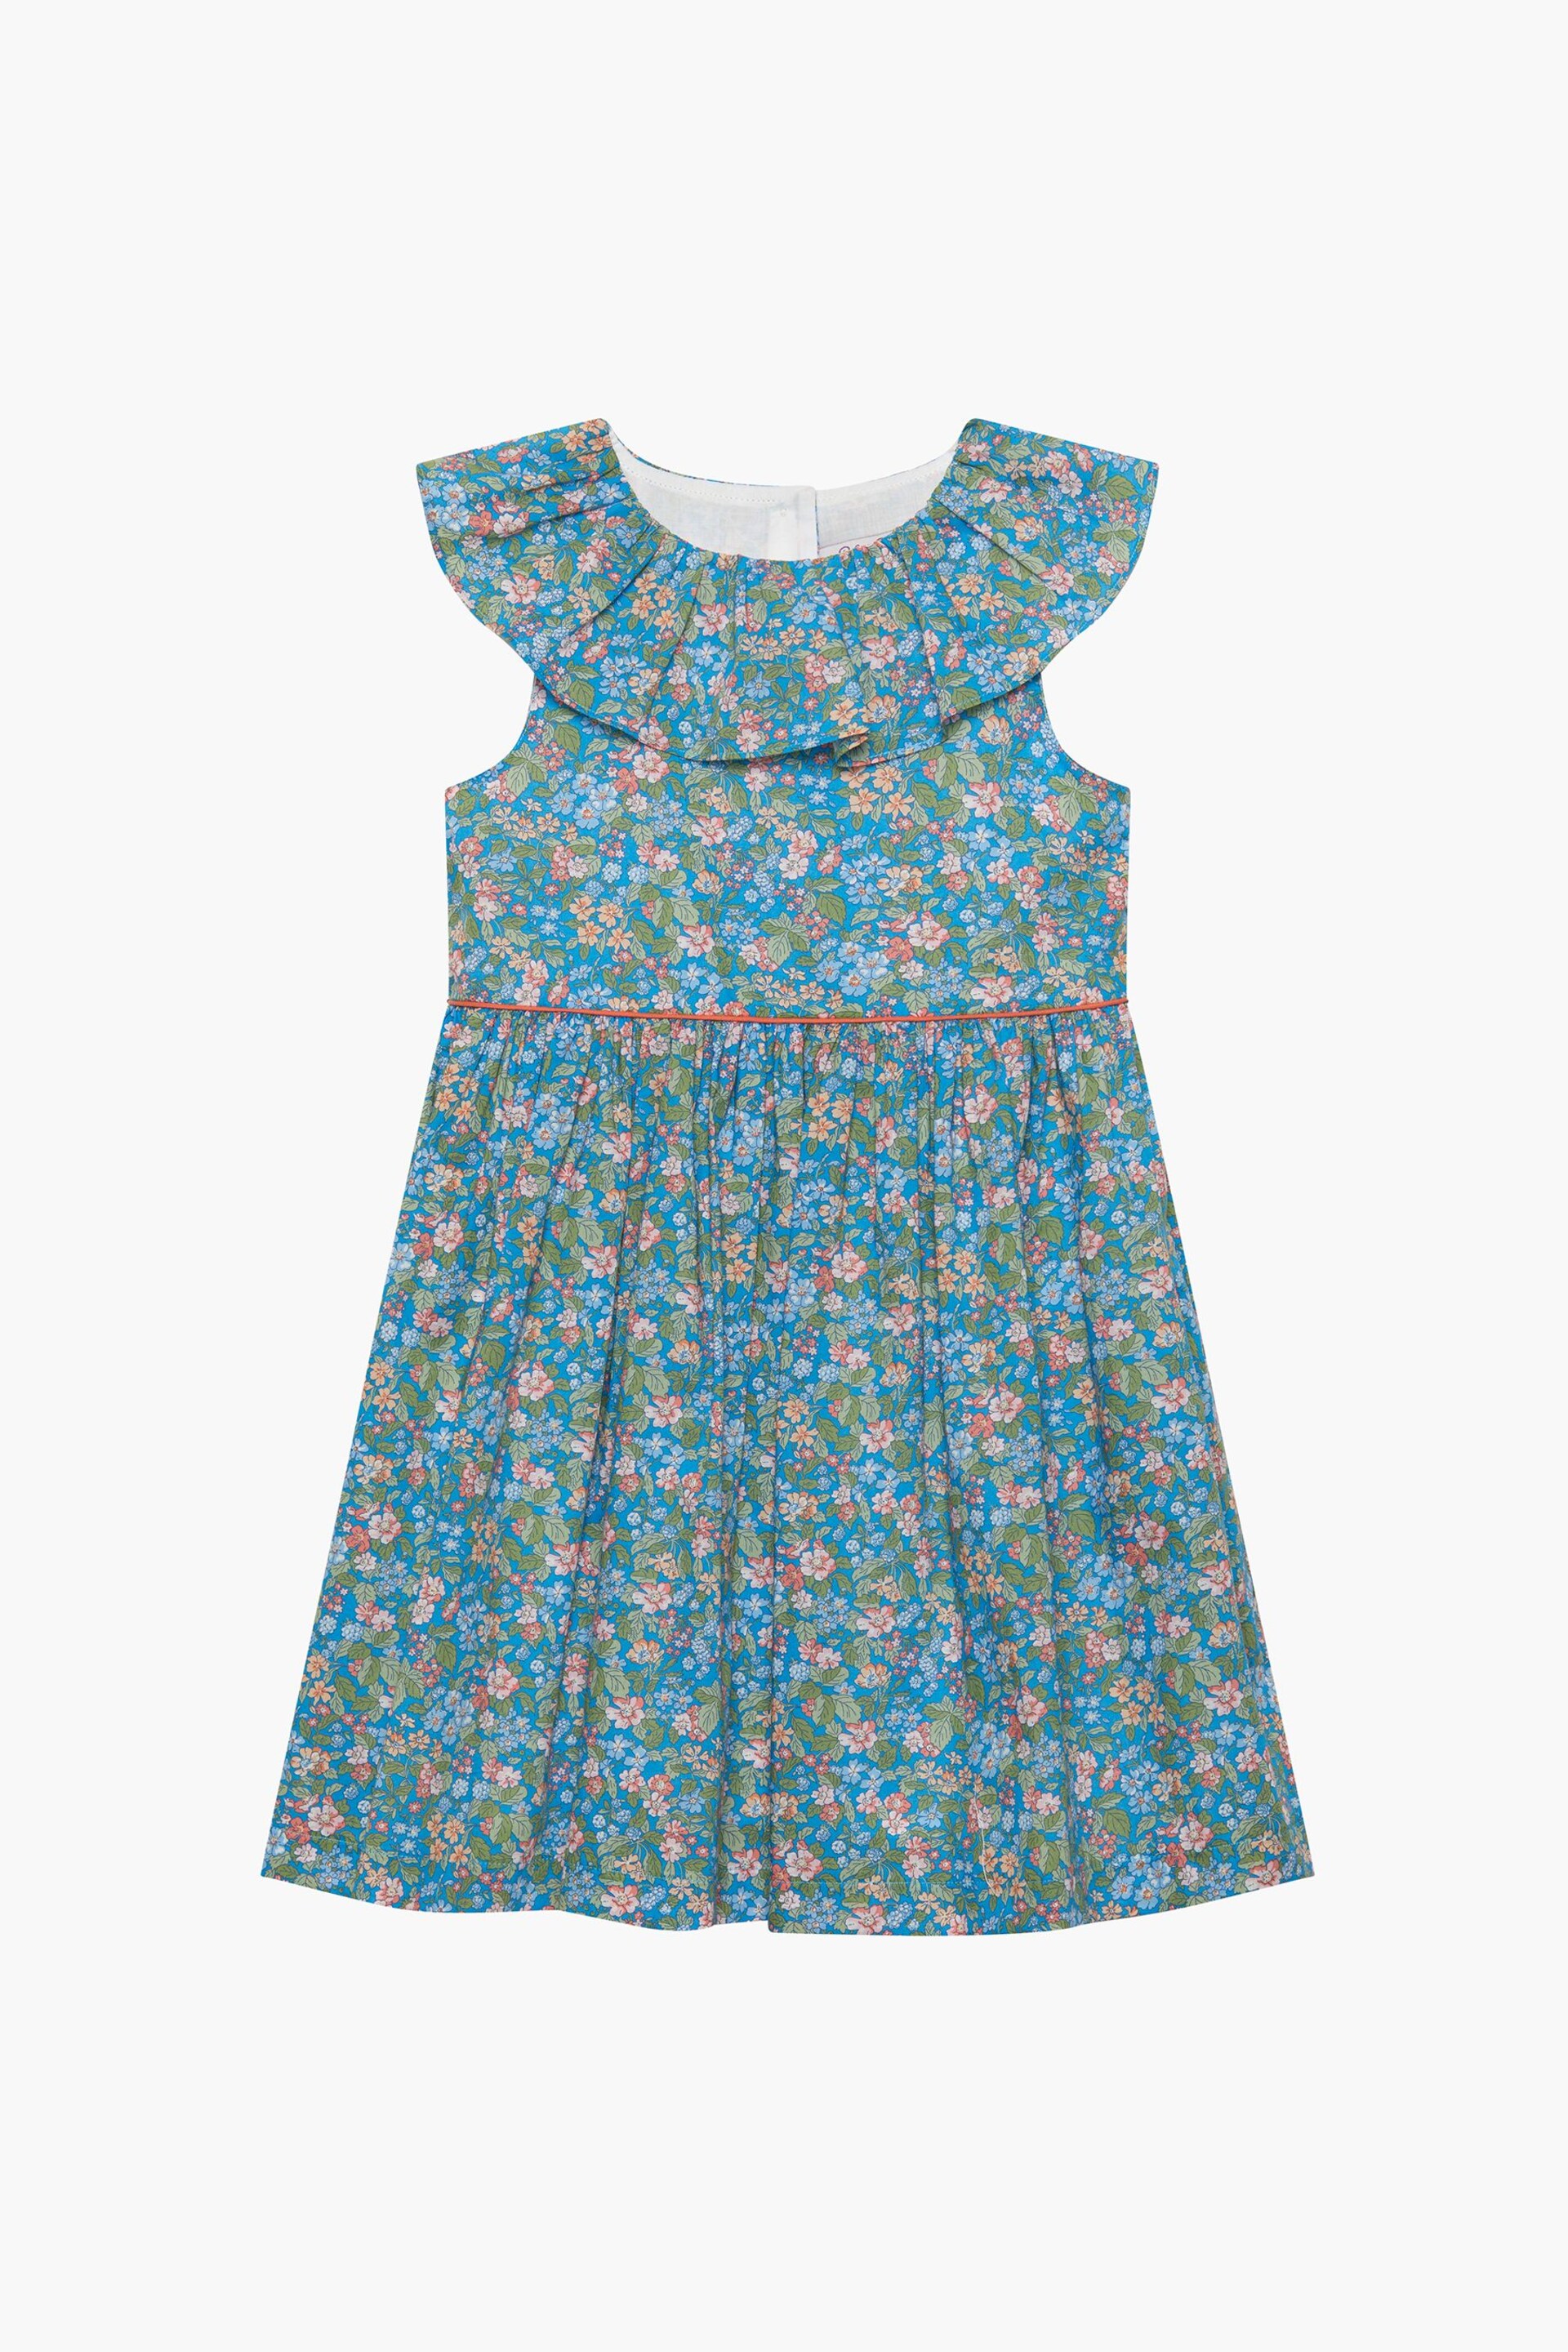 Trotters London Liberty Print Blue Hedgerow Ramble Cotton Willow Dress - Image 1 of 3